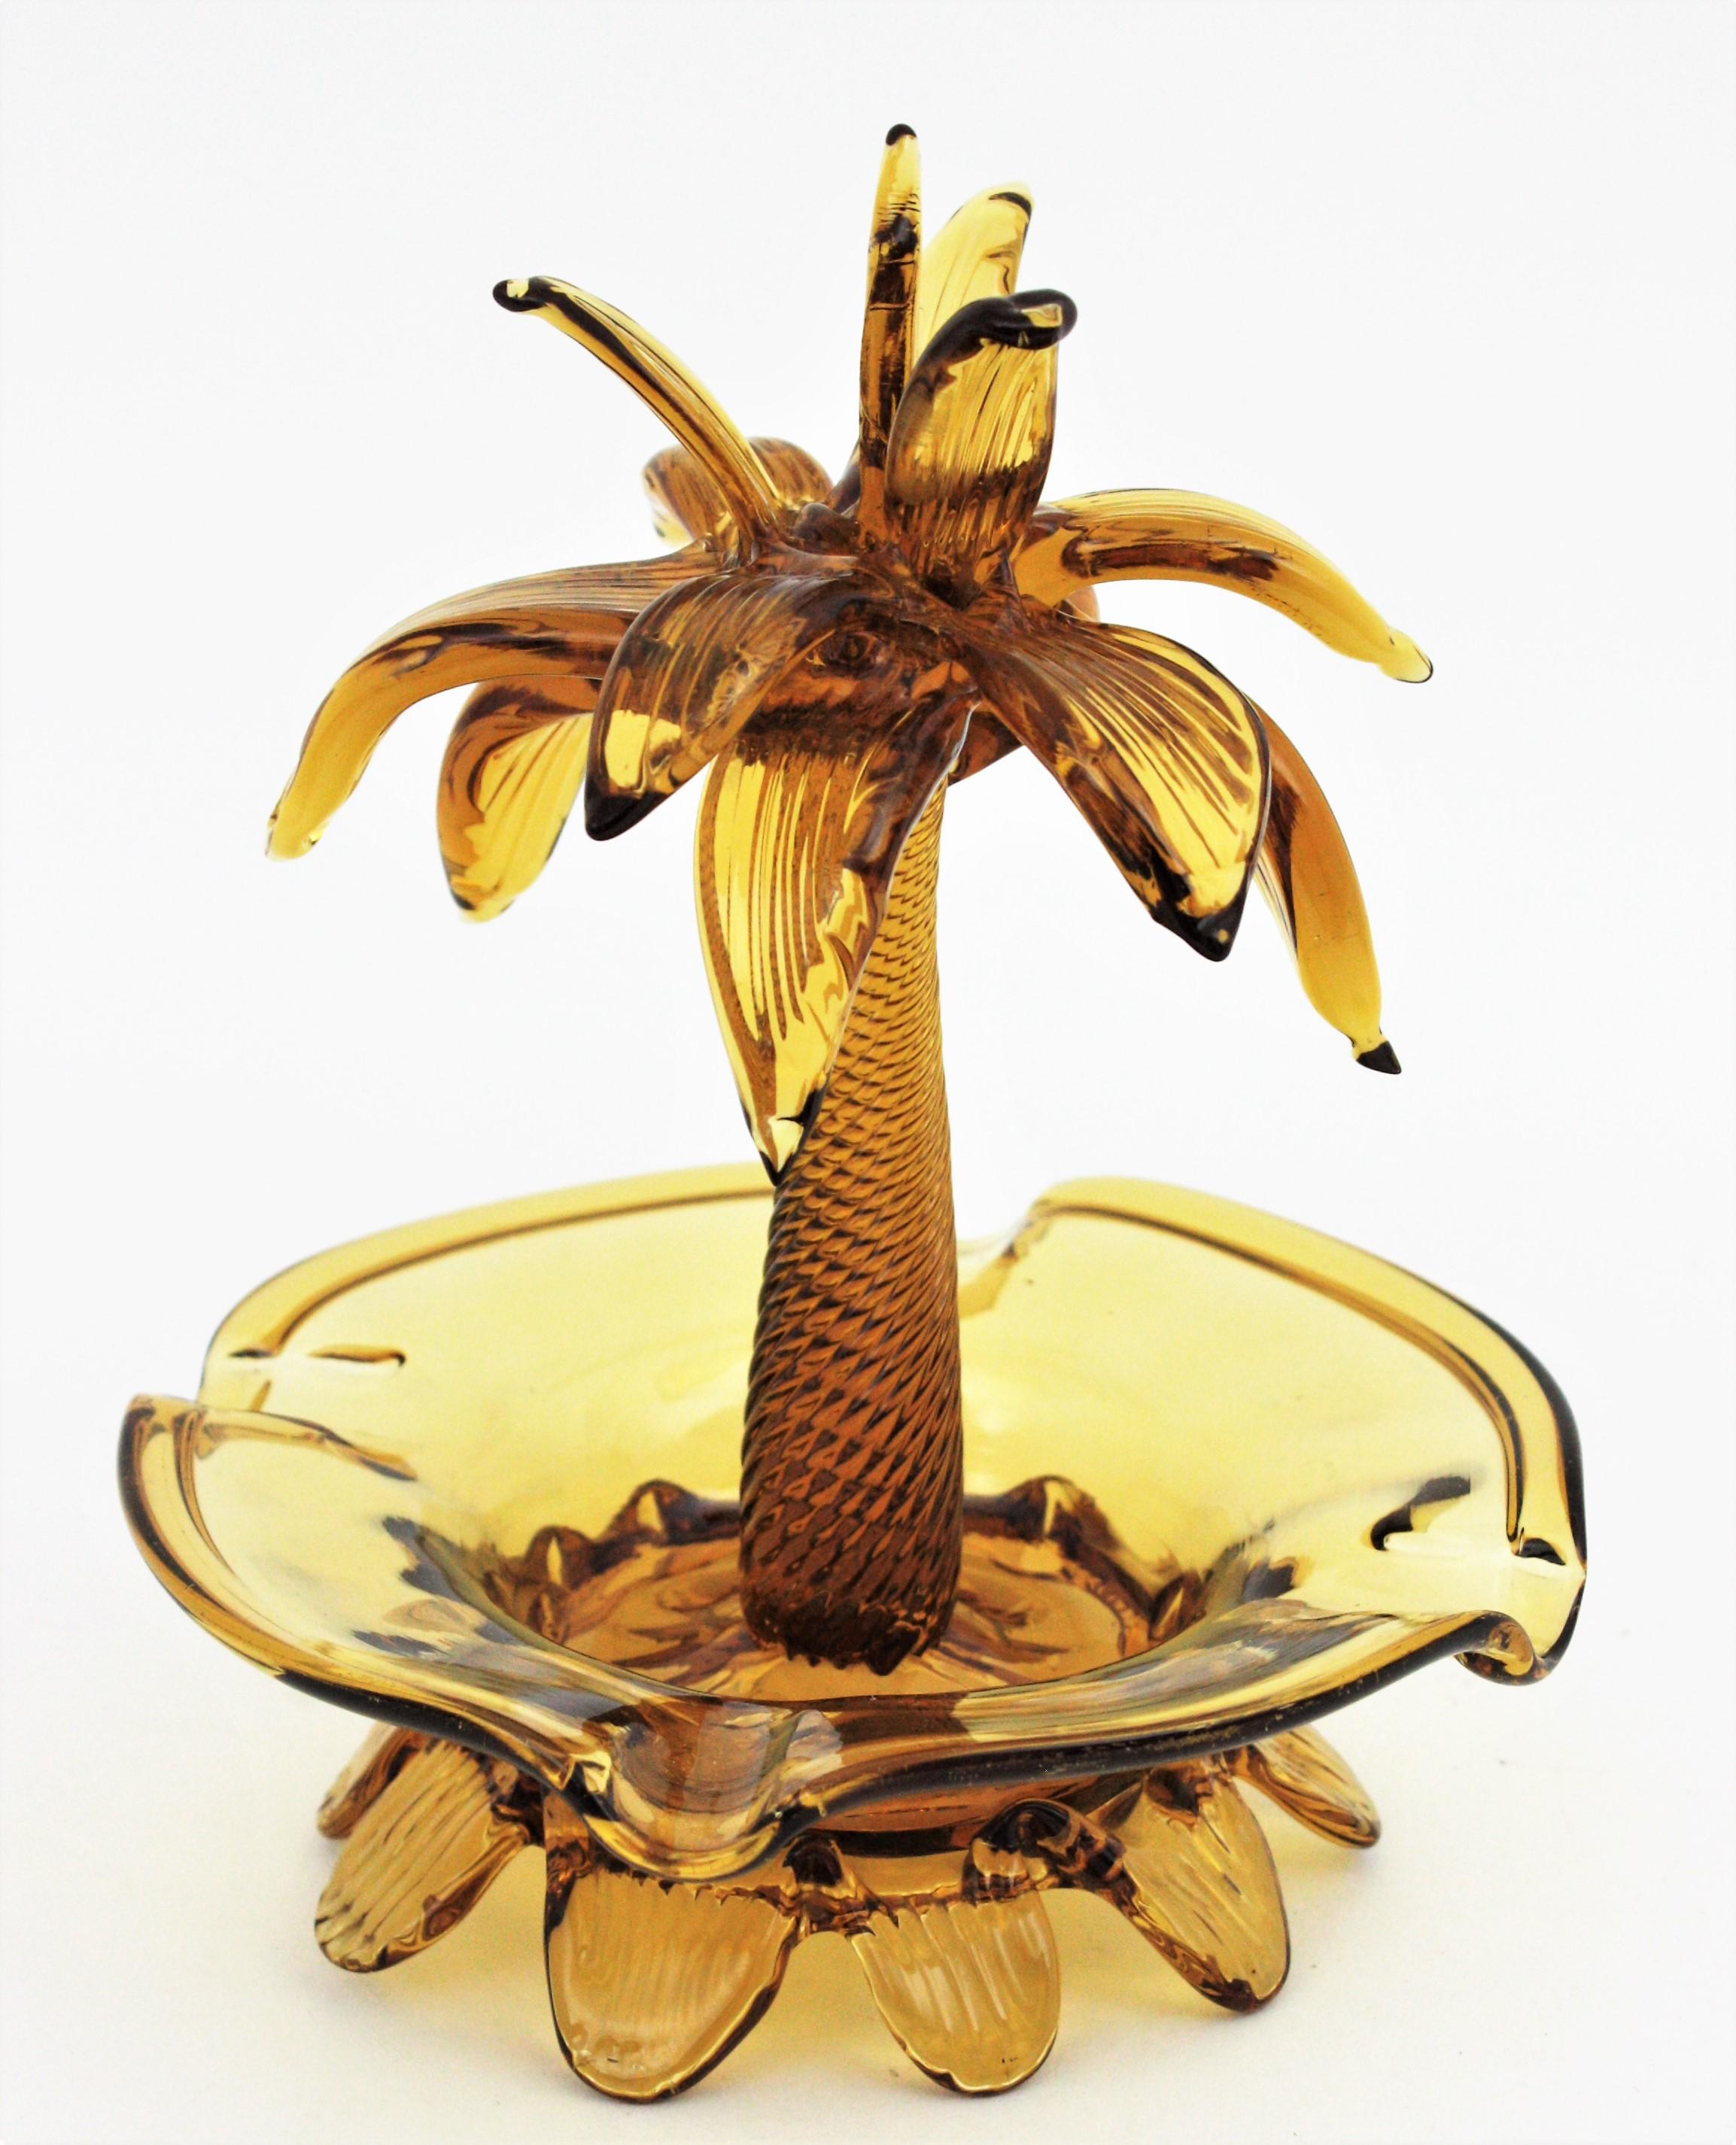 Midcentury Handblown Palm Tree ashtray / bowl, Amber Murano glass, Italy, 1960s.
This pretty beautiful palm tree ashtray has pulled glass details and swirls.
To be used as ashtray, decorative bowl, rings bowl  or to be exhibited asd a part of a